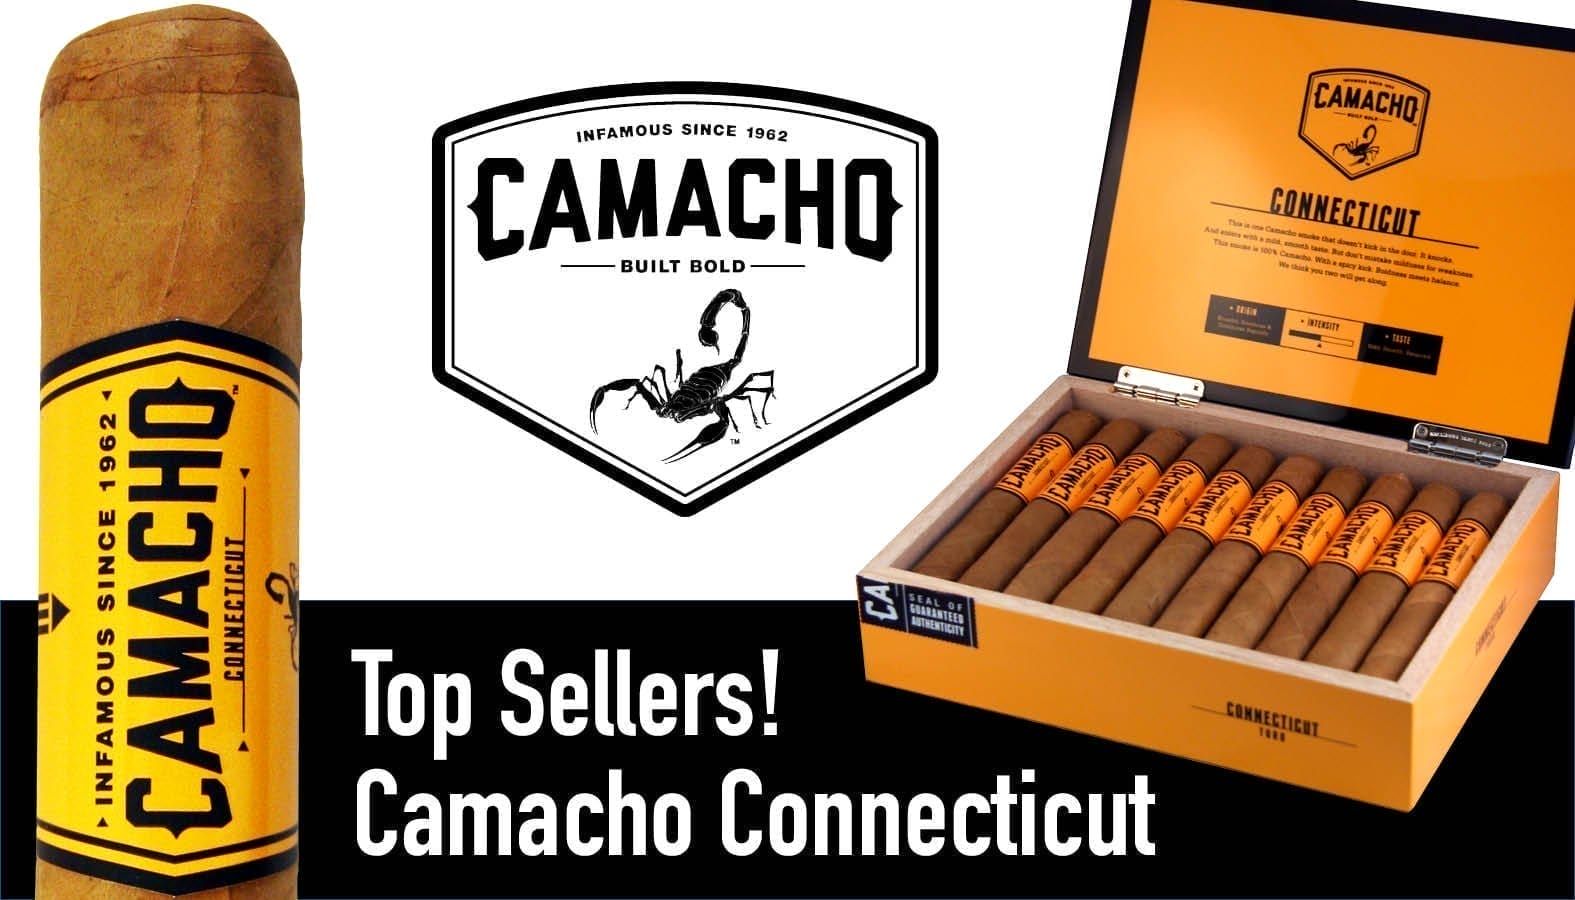 Top Sellers! Camacho Connecticut